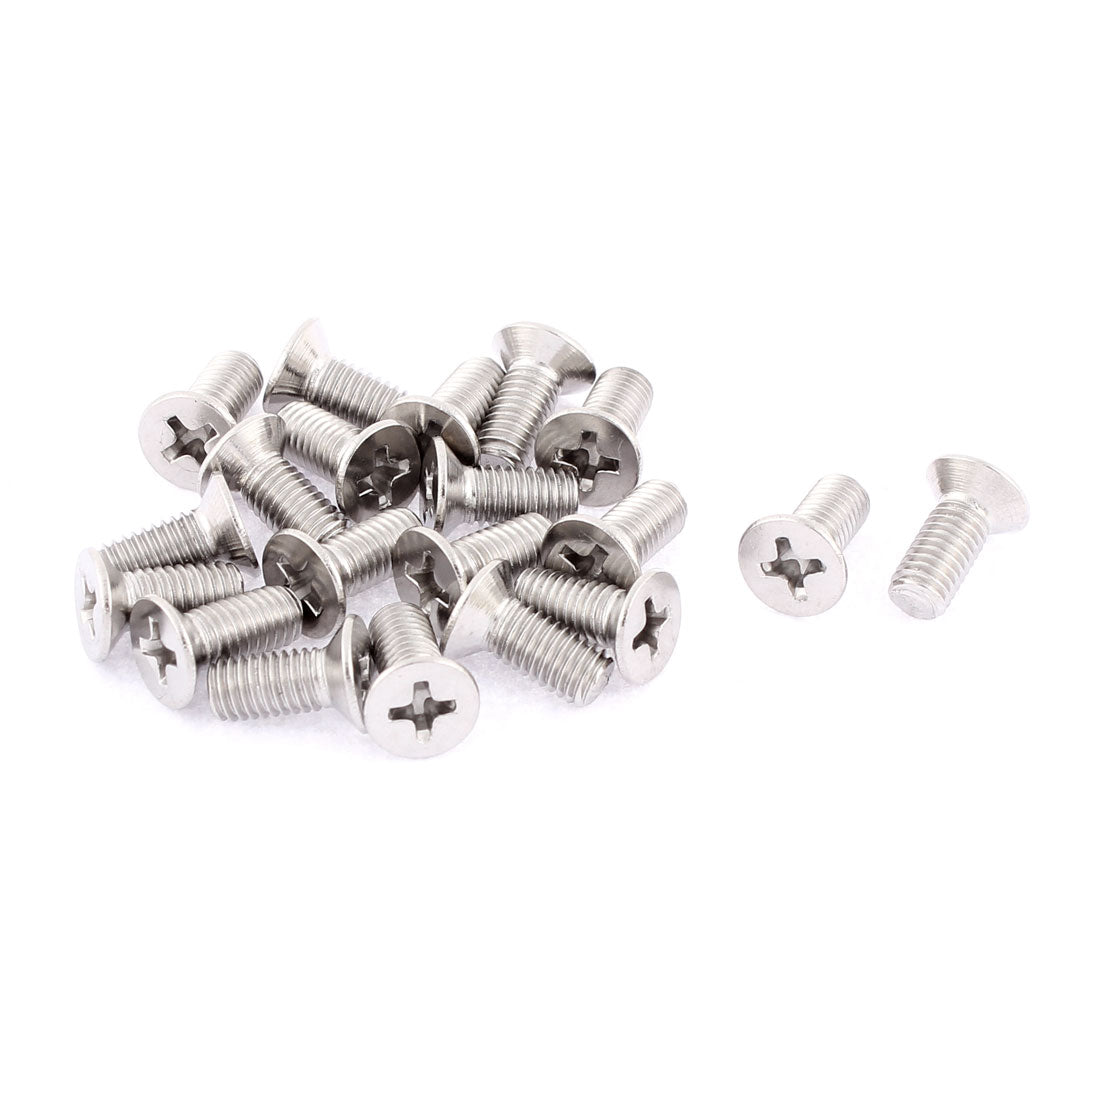 uxcell Uxcell M5 x 12mm Phillips Round Head Stainless Steel Countersunk Bolts Screws 20 Pcs